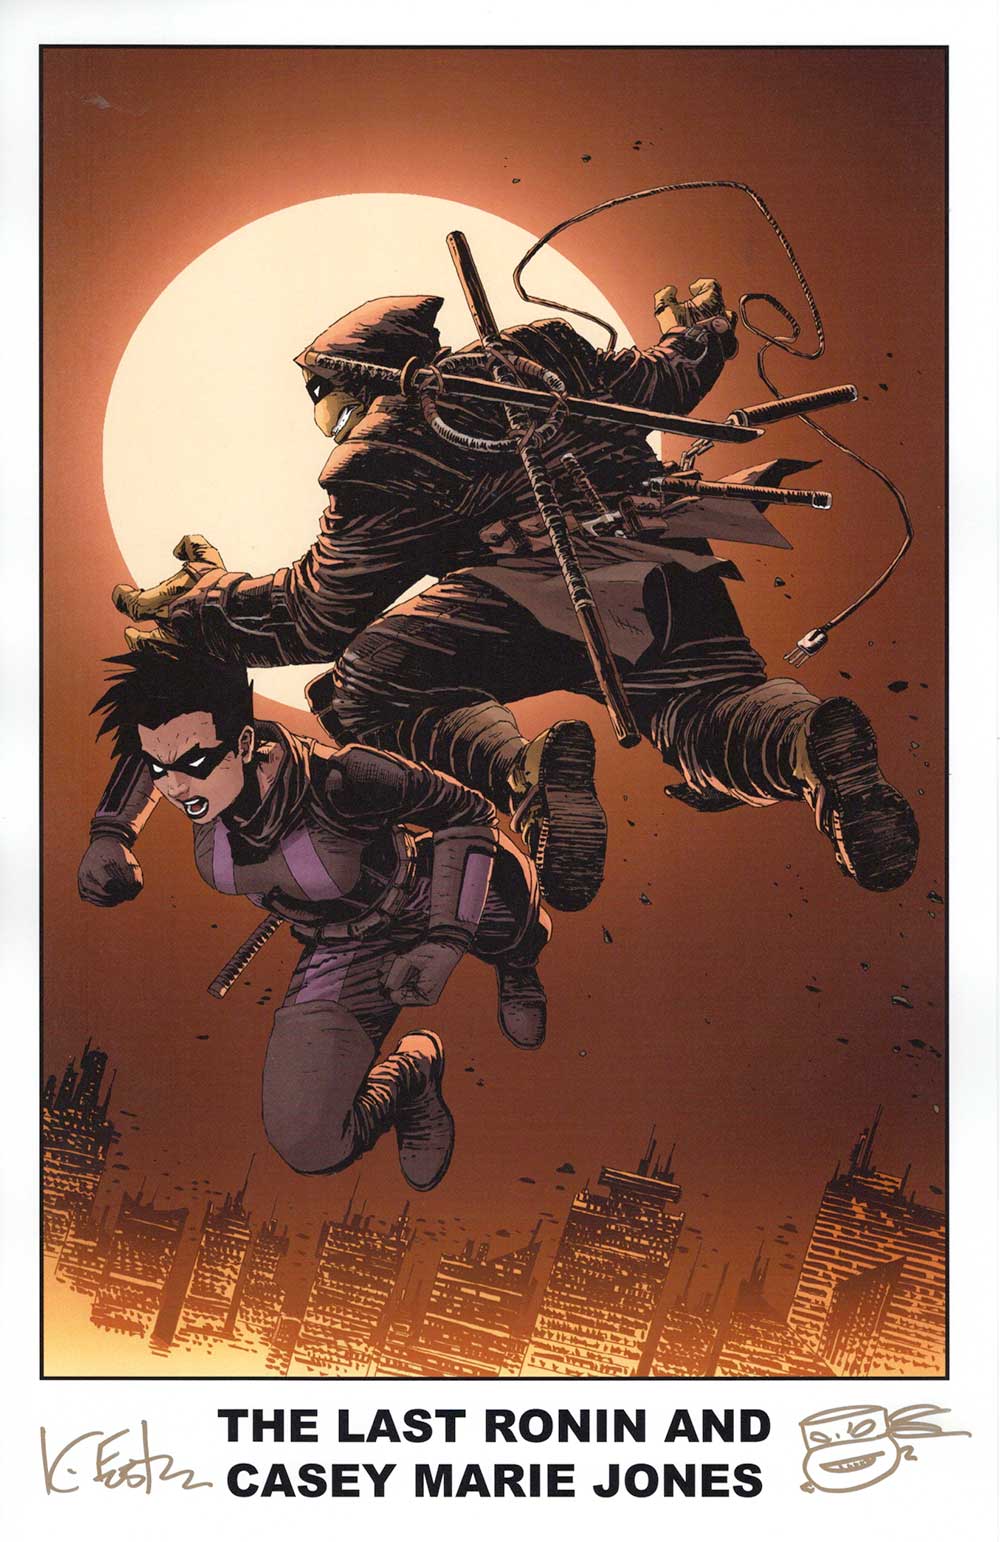 The Last Ronin and Casey Marie Jones, Print – Signed with a headsketch remarque